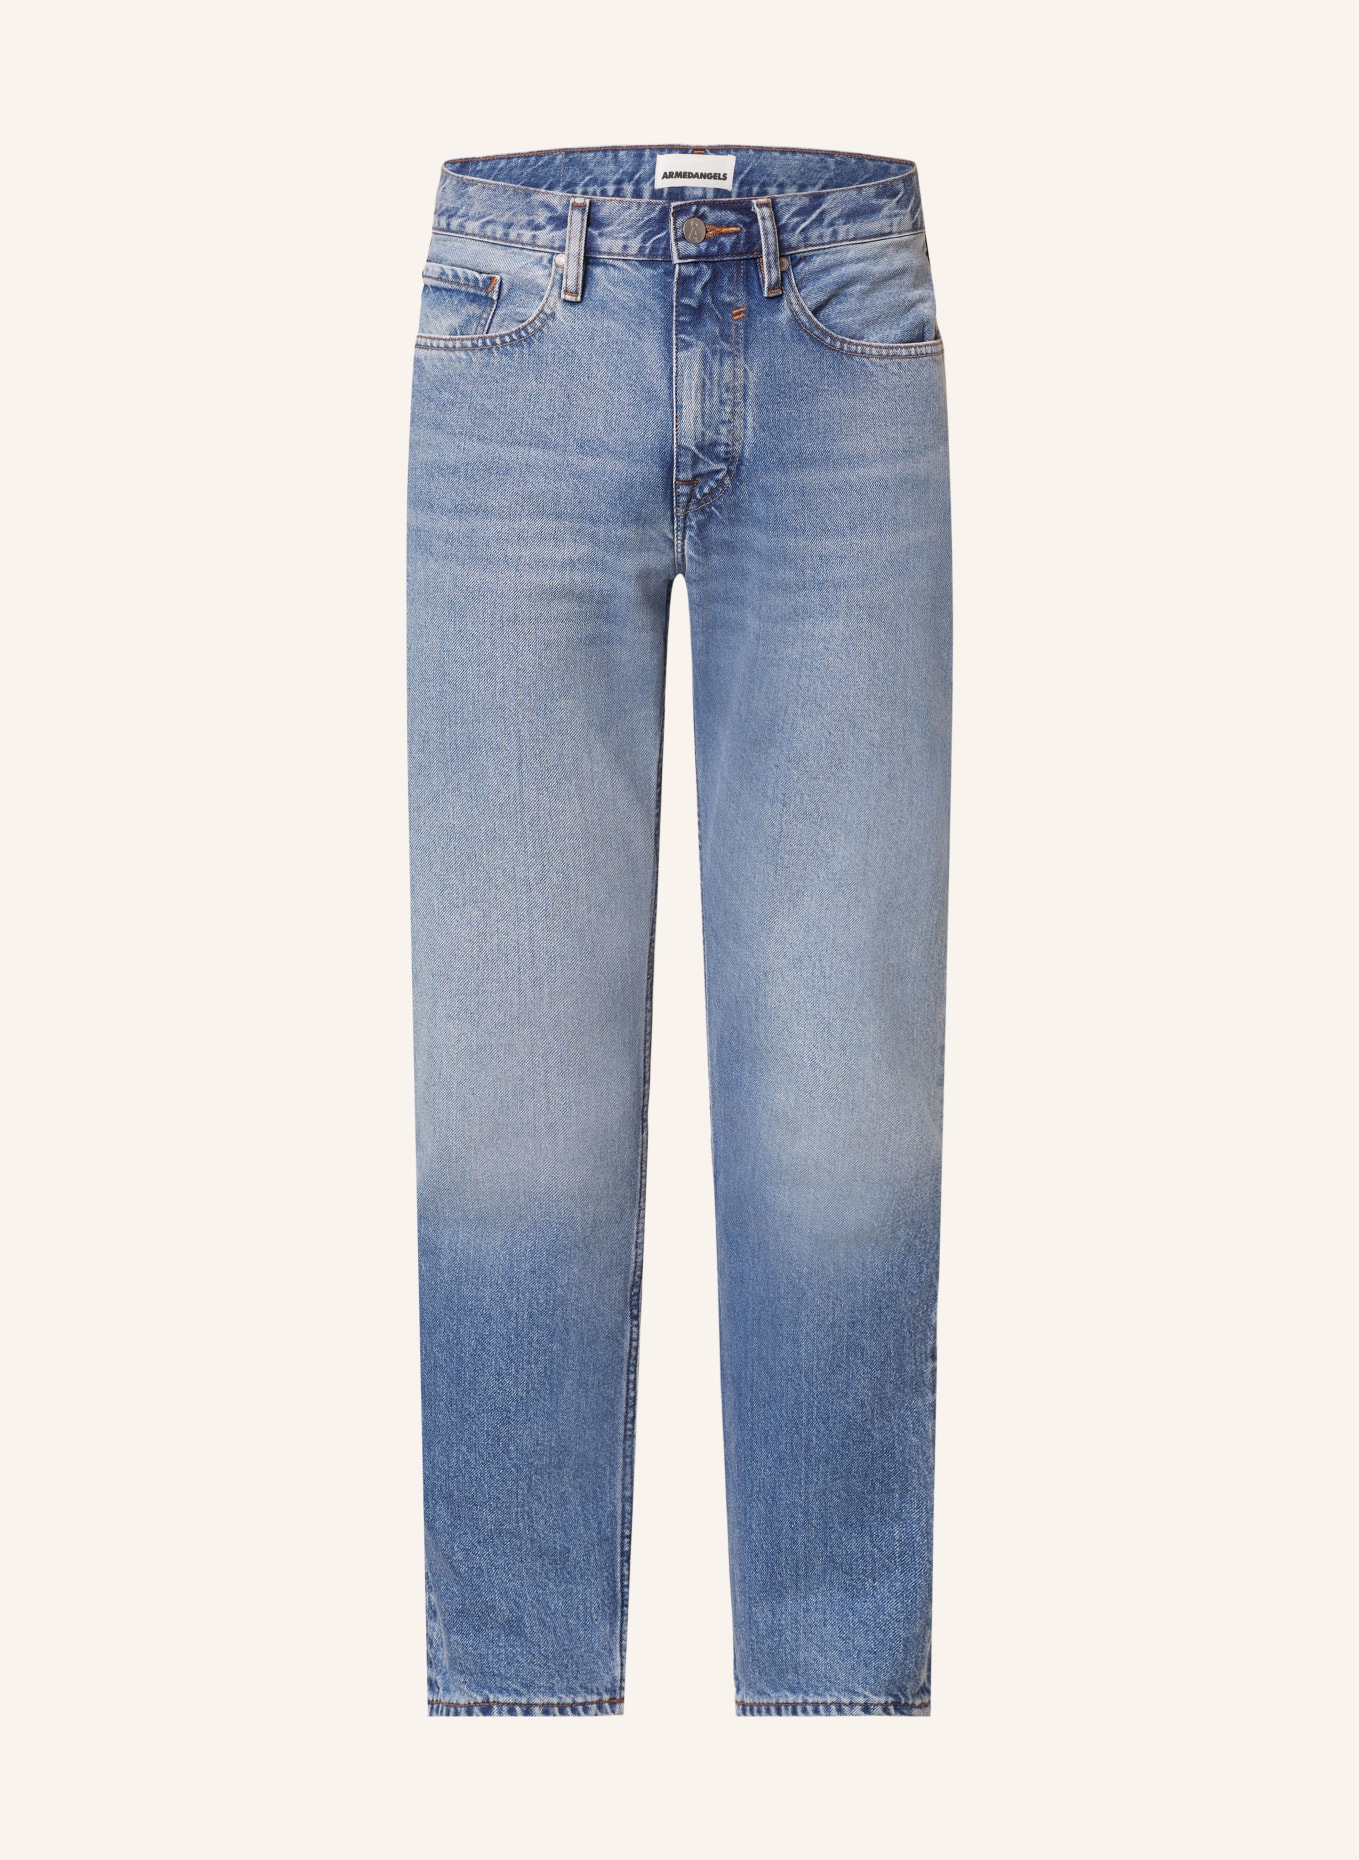 ARMEDANGELS Jeans DYLAANO Straight Fit, Farbe: 2282 sprinkle blue (Bild 1)